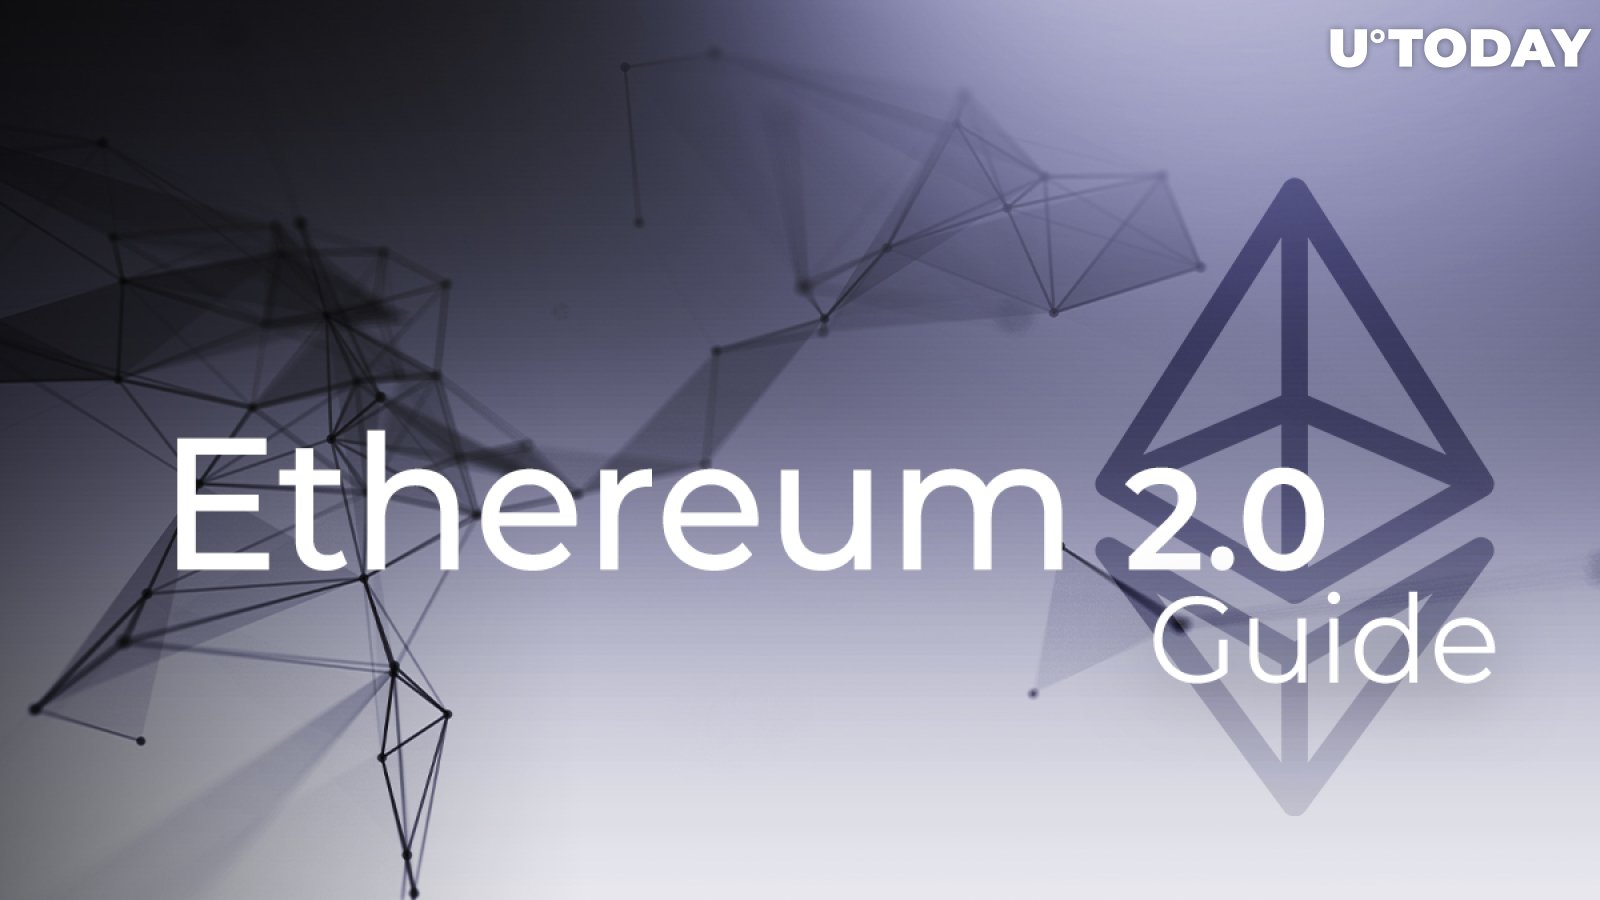 Ethereum (ETH) 2.0: What is Ethereum’s Next Phase After the Istanbul Hard Fork